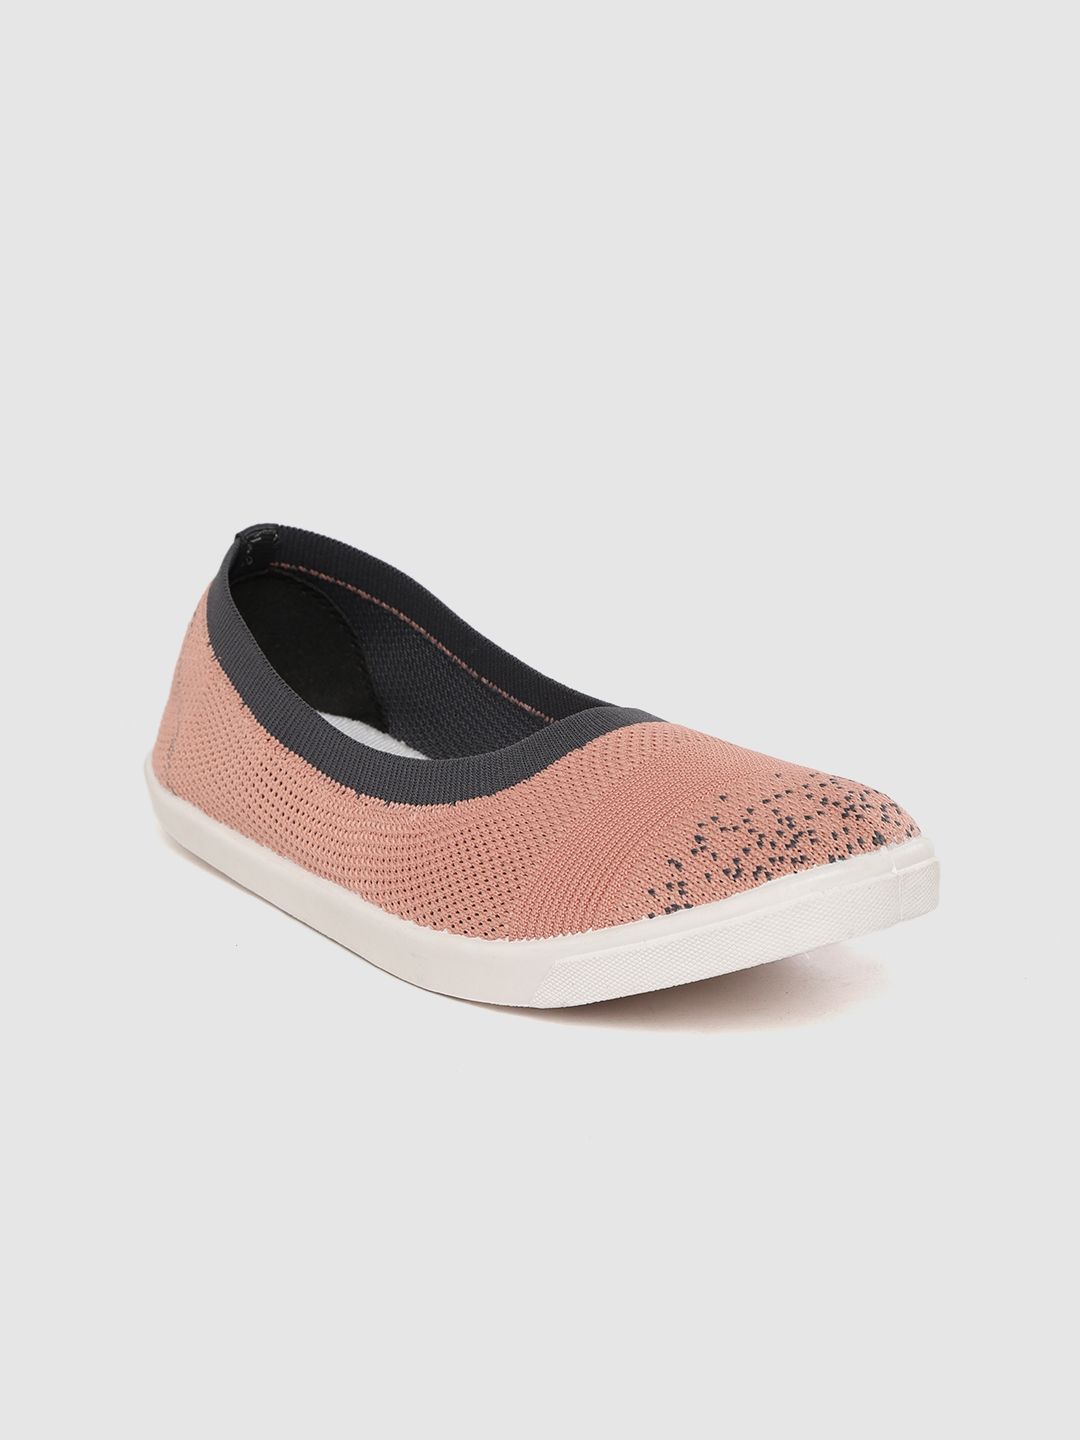 Mast & Harbour Women Peach-Coloured & Navy Woven Design Slip-On Sneakers Price in India